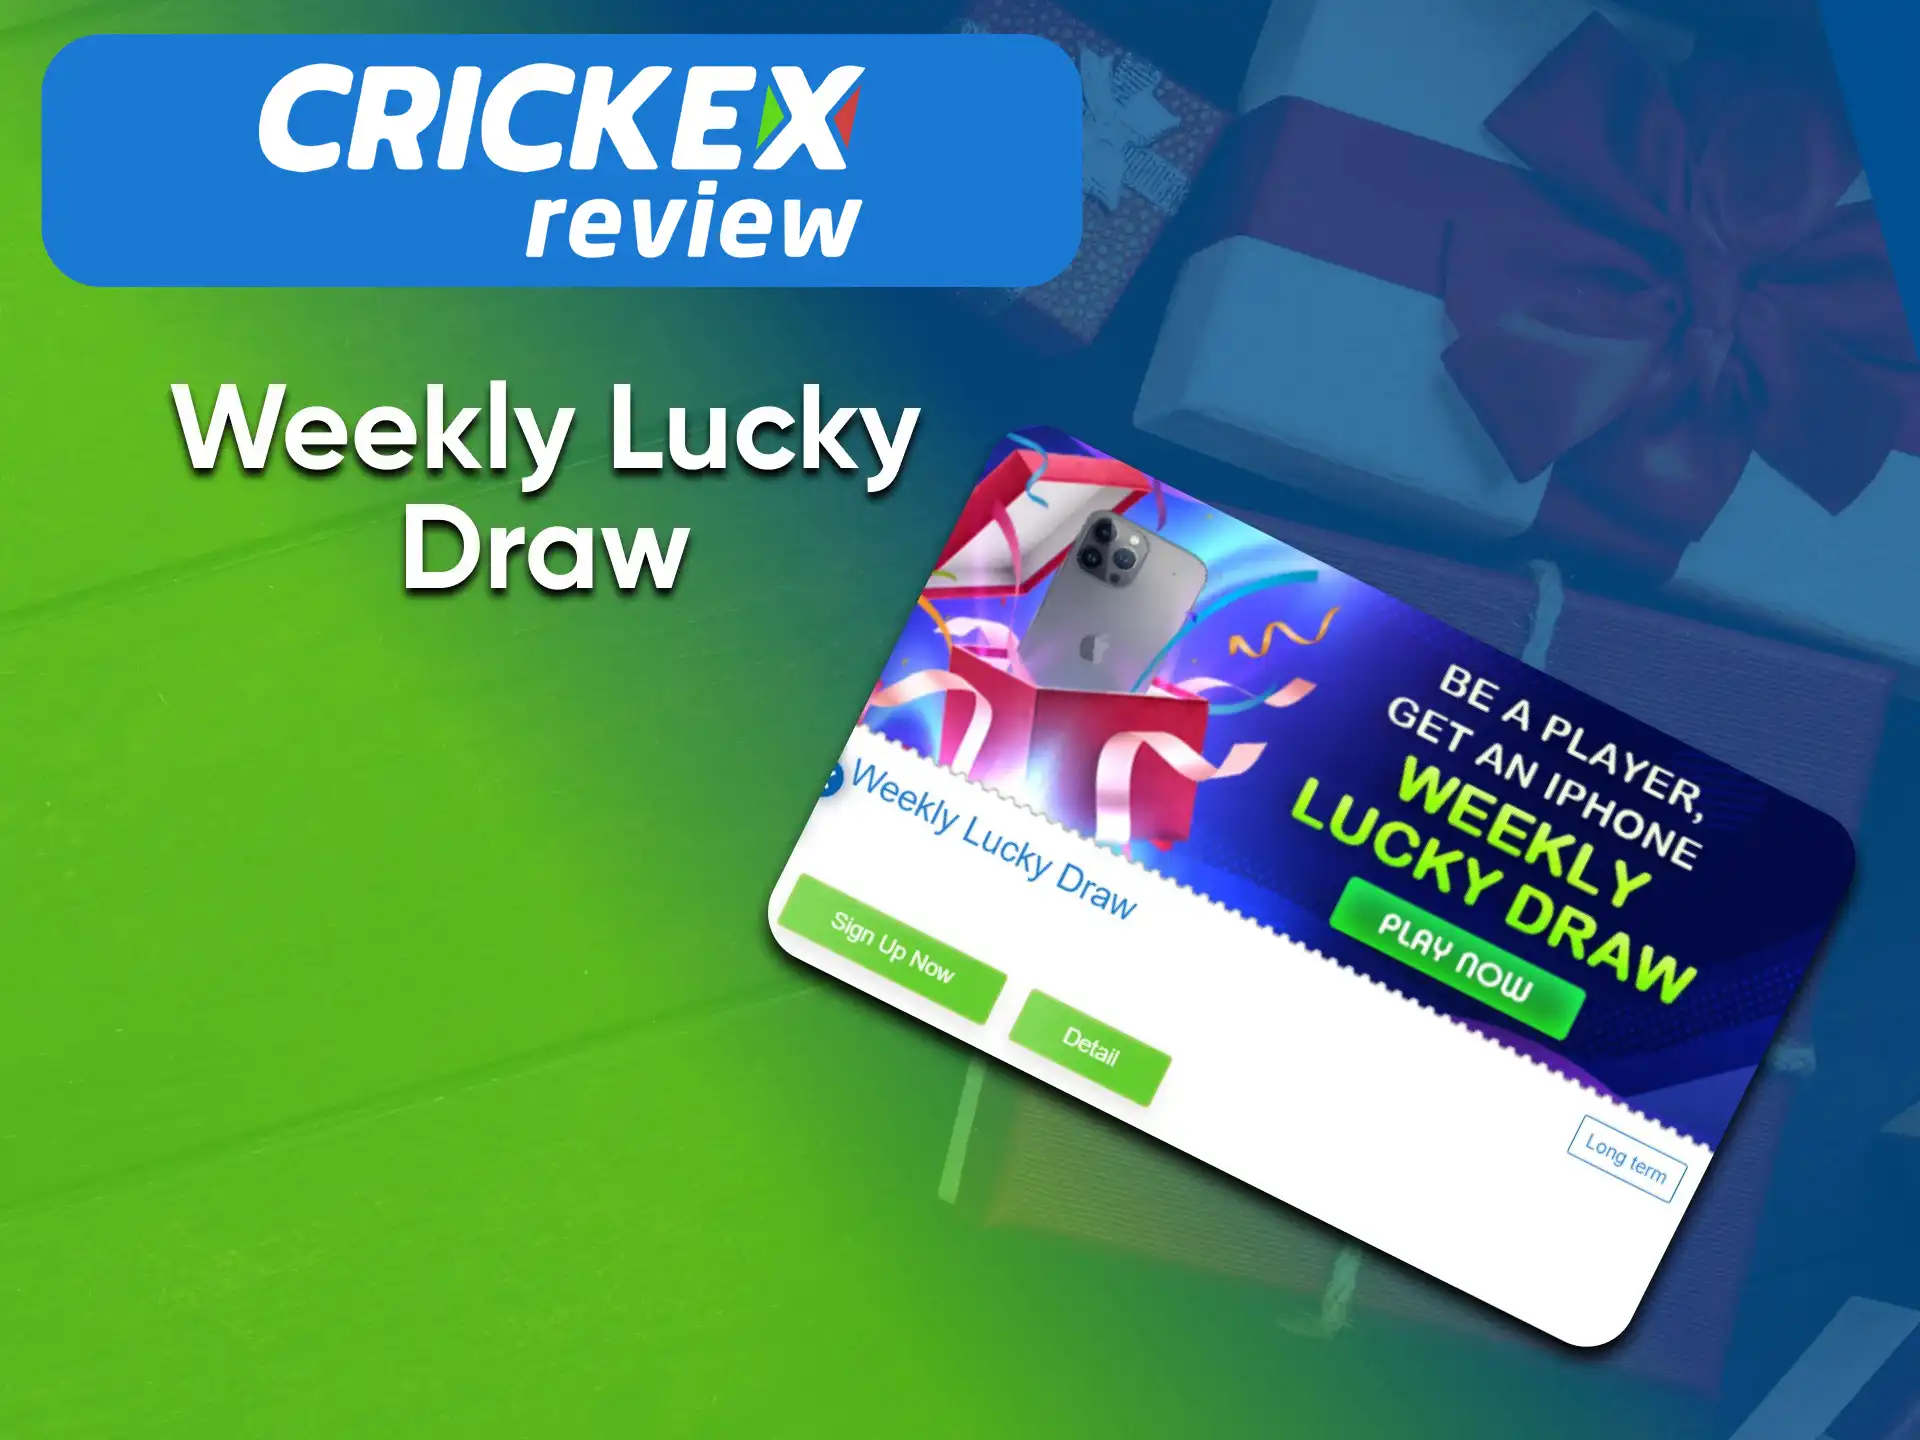 Choose Crickex for games and bets and get a bonus.